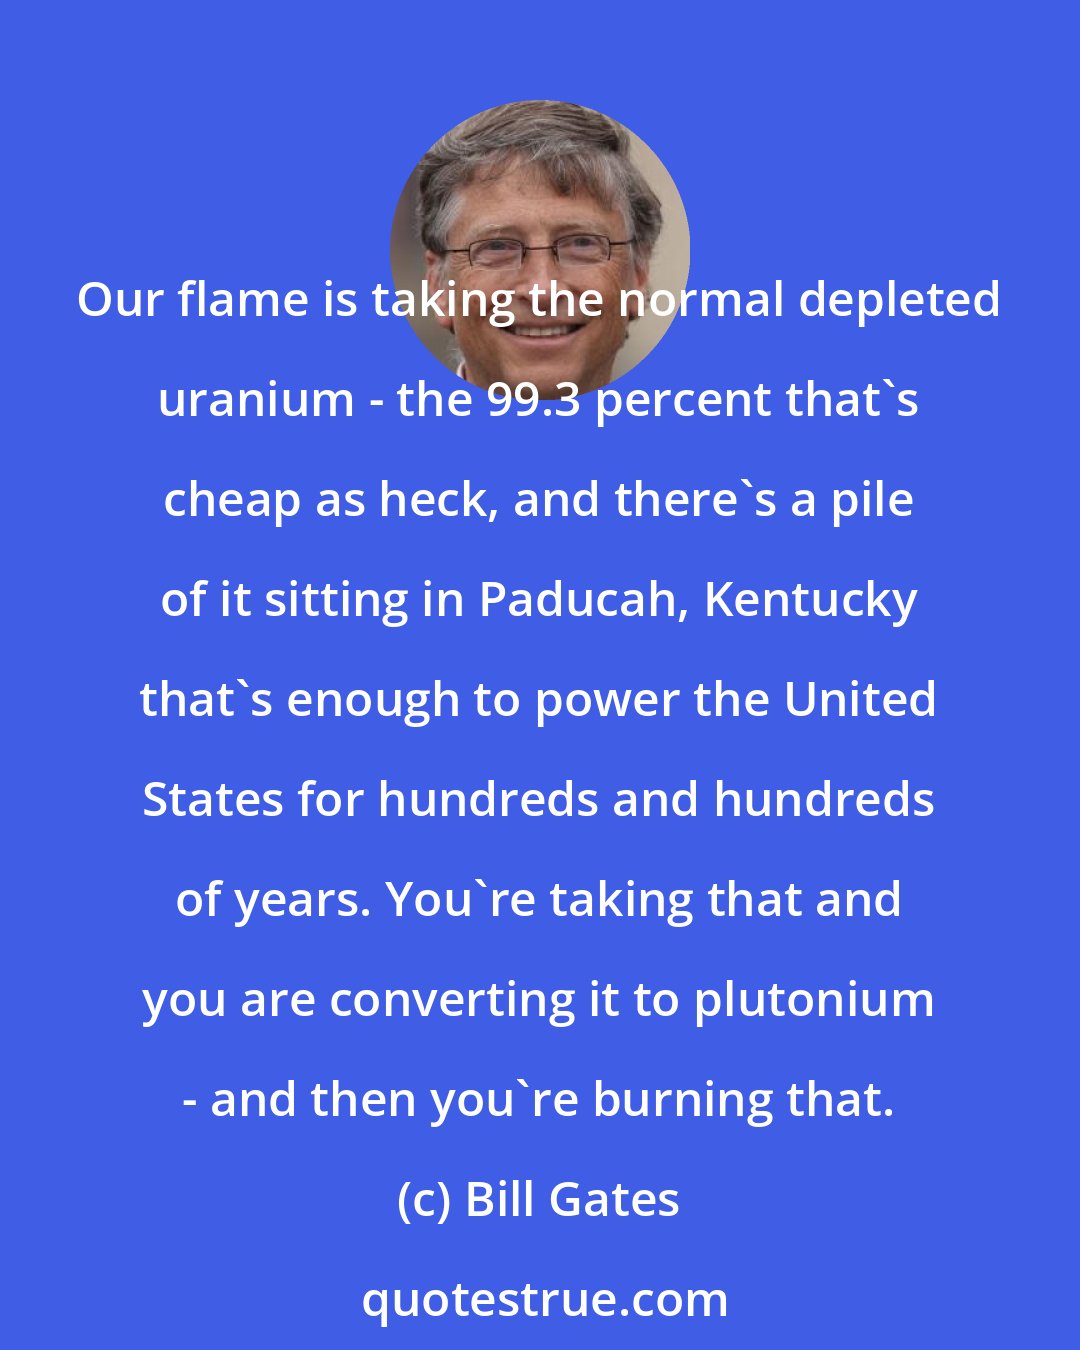 Bill Gates: Our flame is taking the normal depleted uranium - the 99.3 percent that's cheap as heck, and there's a pile of it sitting in Paducah, Kentucky that's enough to power the United States for hundreds and hundreds of years. You're taking that and you are converting it to plutonium - and then you're burning that.